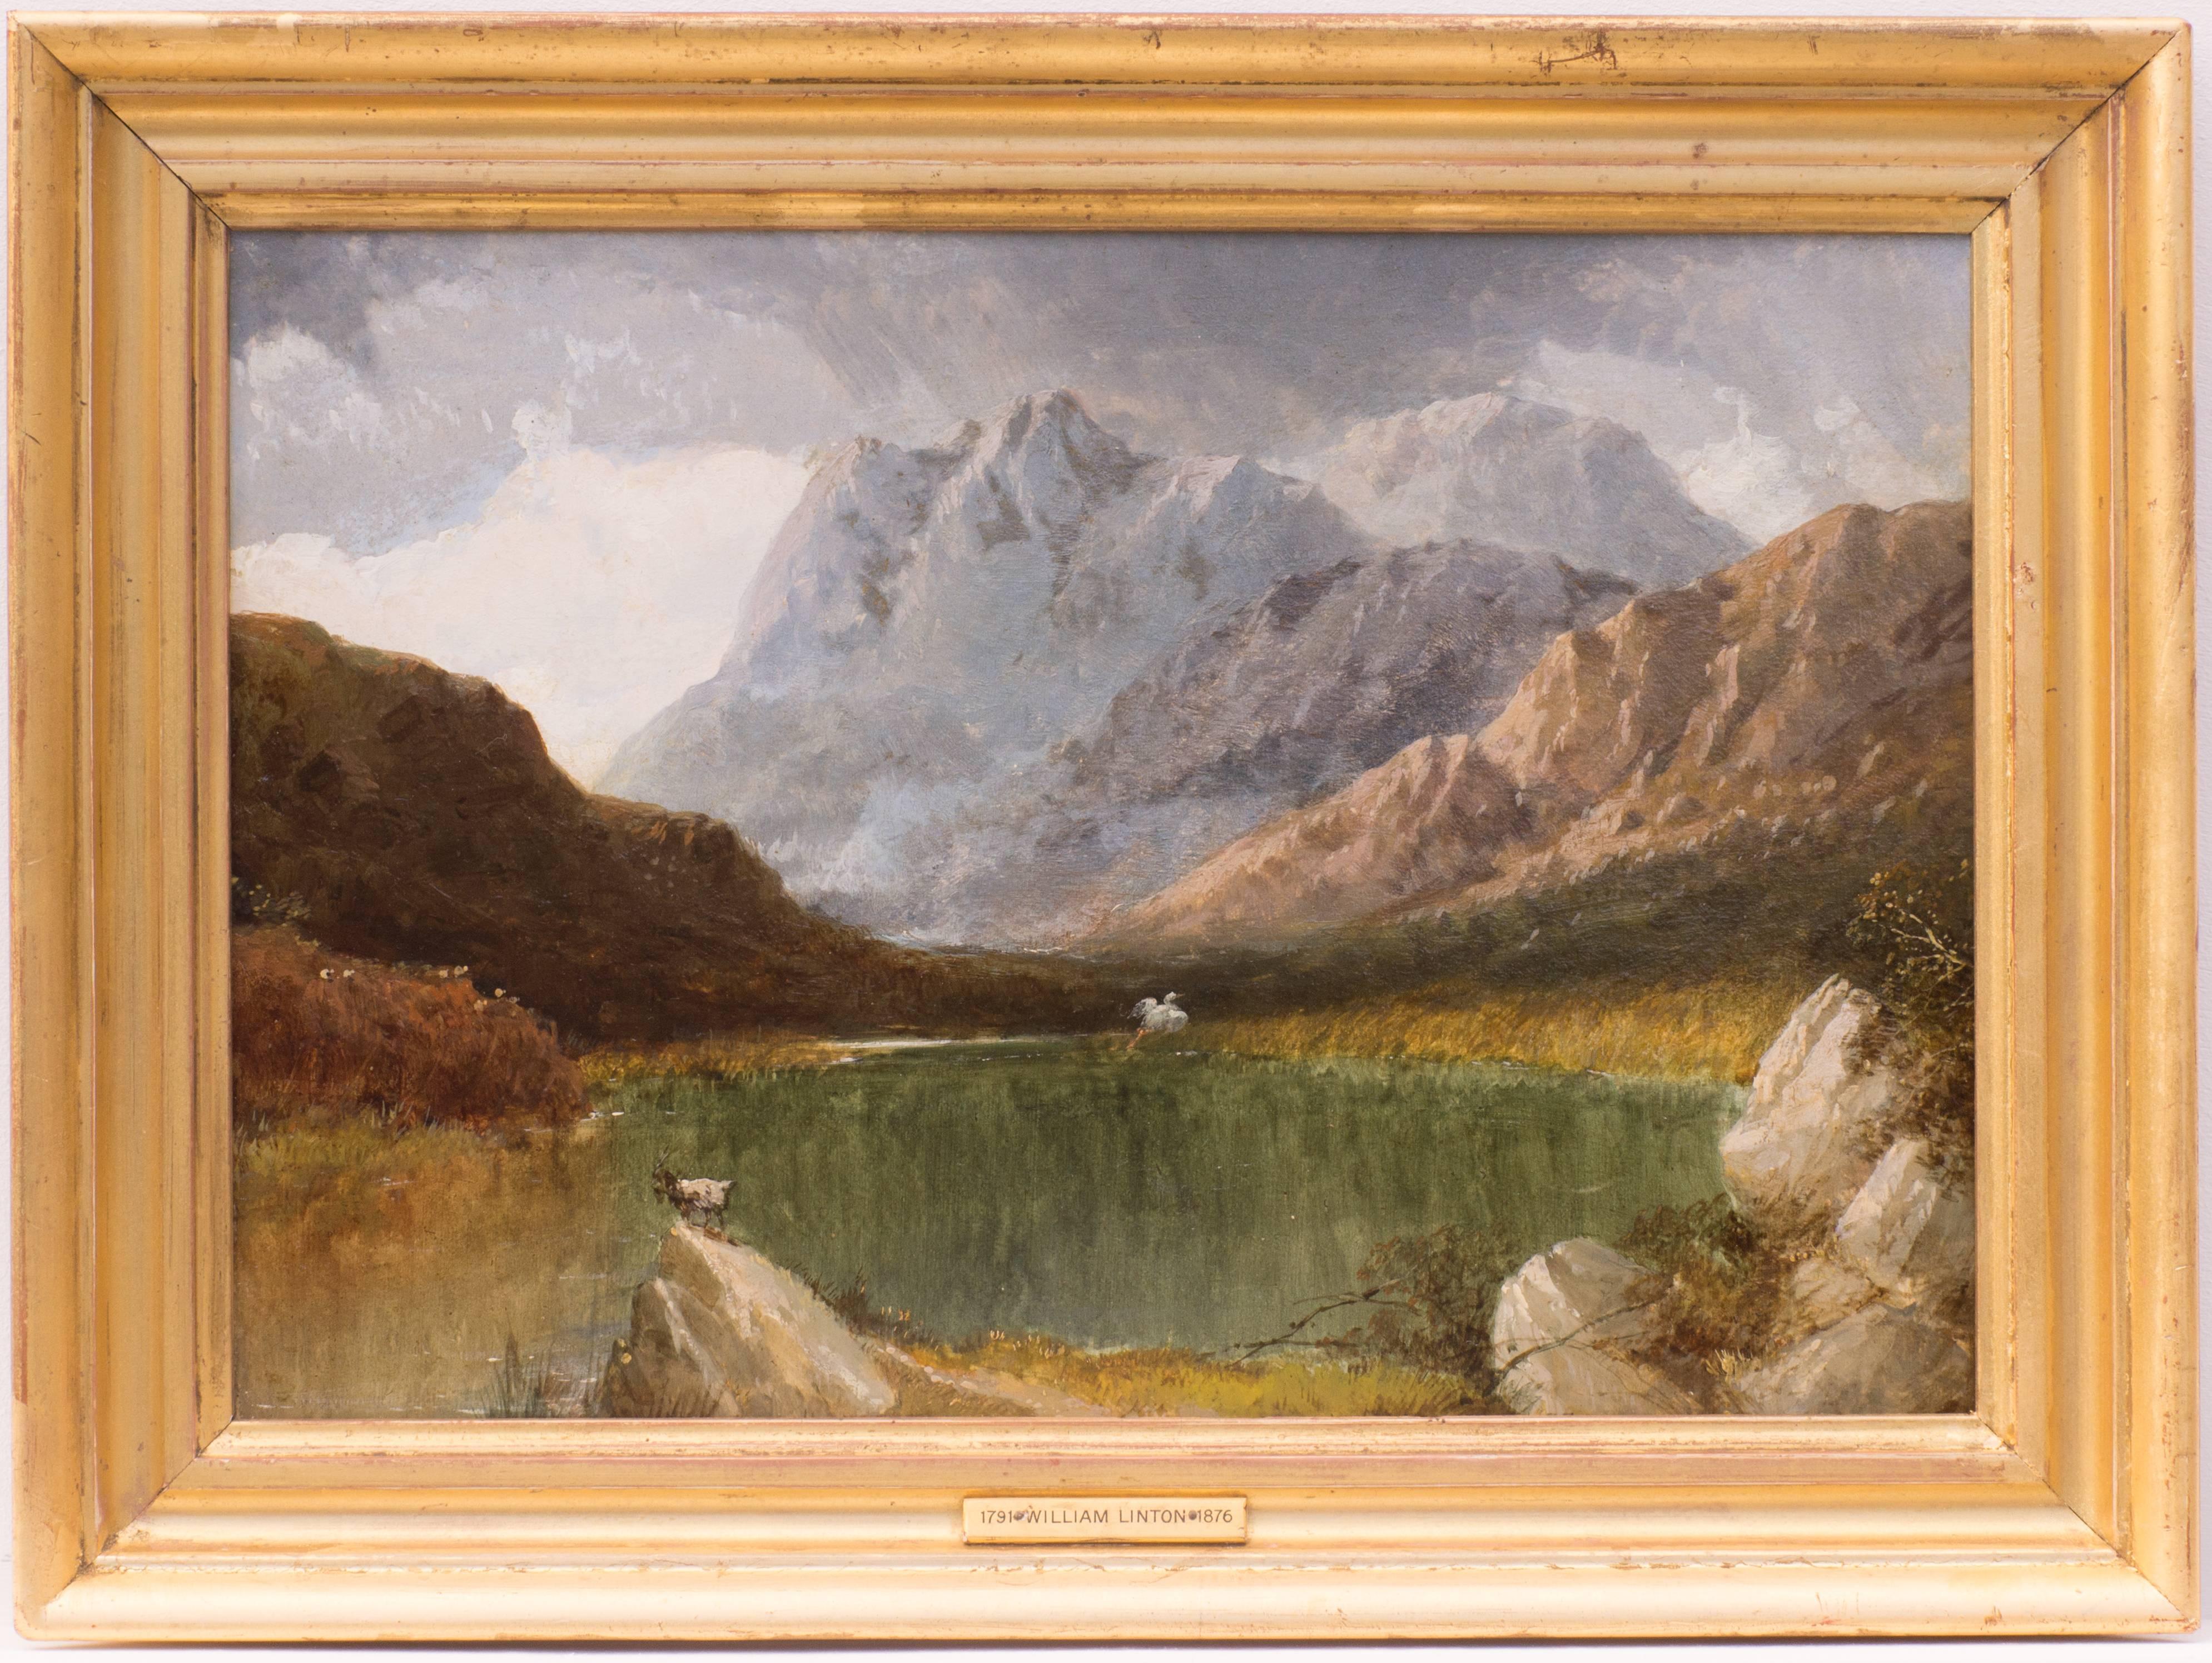 William Linton Landscape Painting - Mountain Lake with Heron, Original Oil on Panel Painting